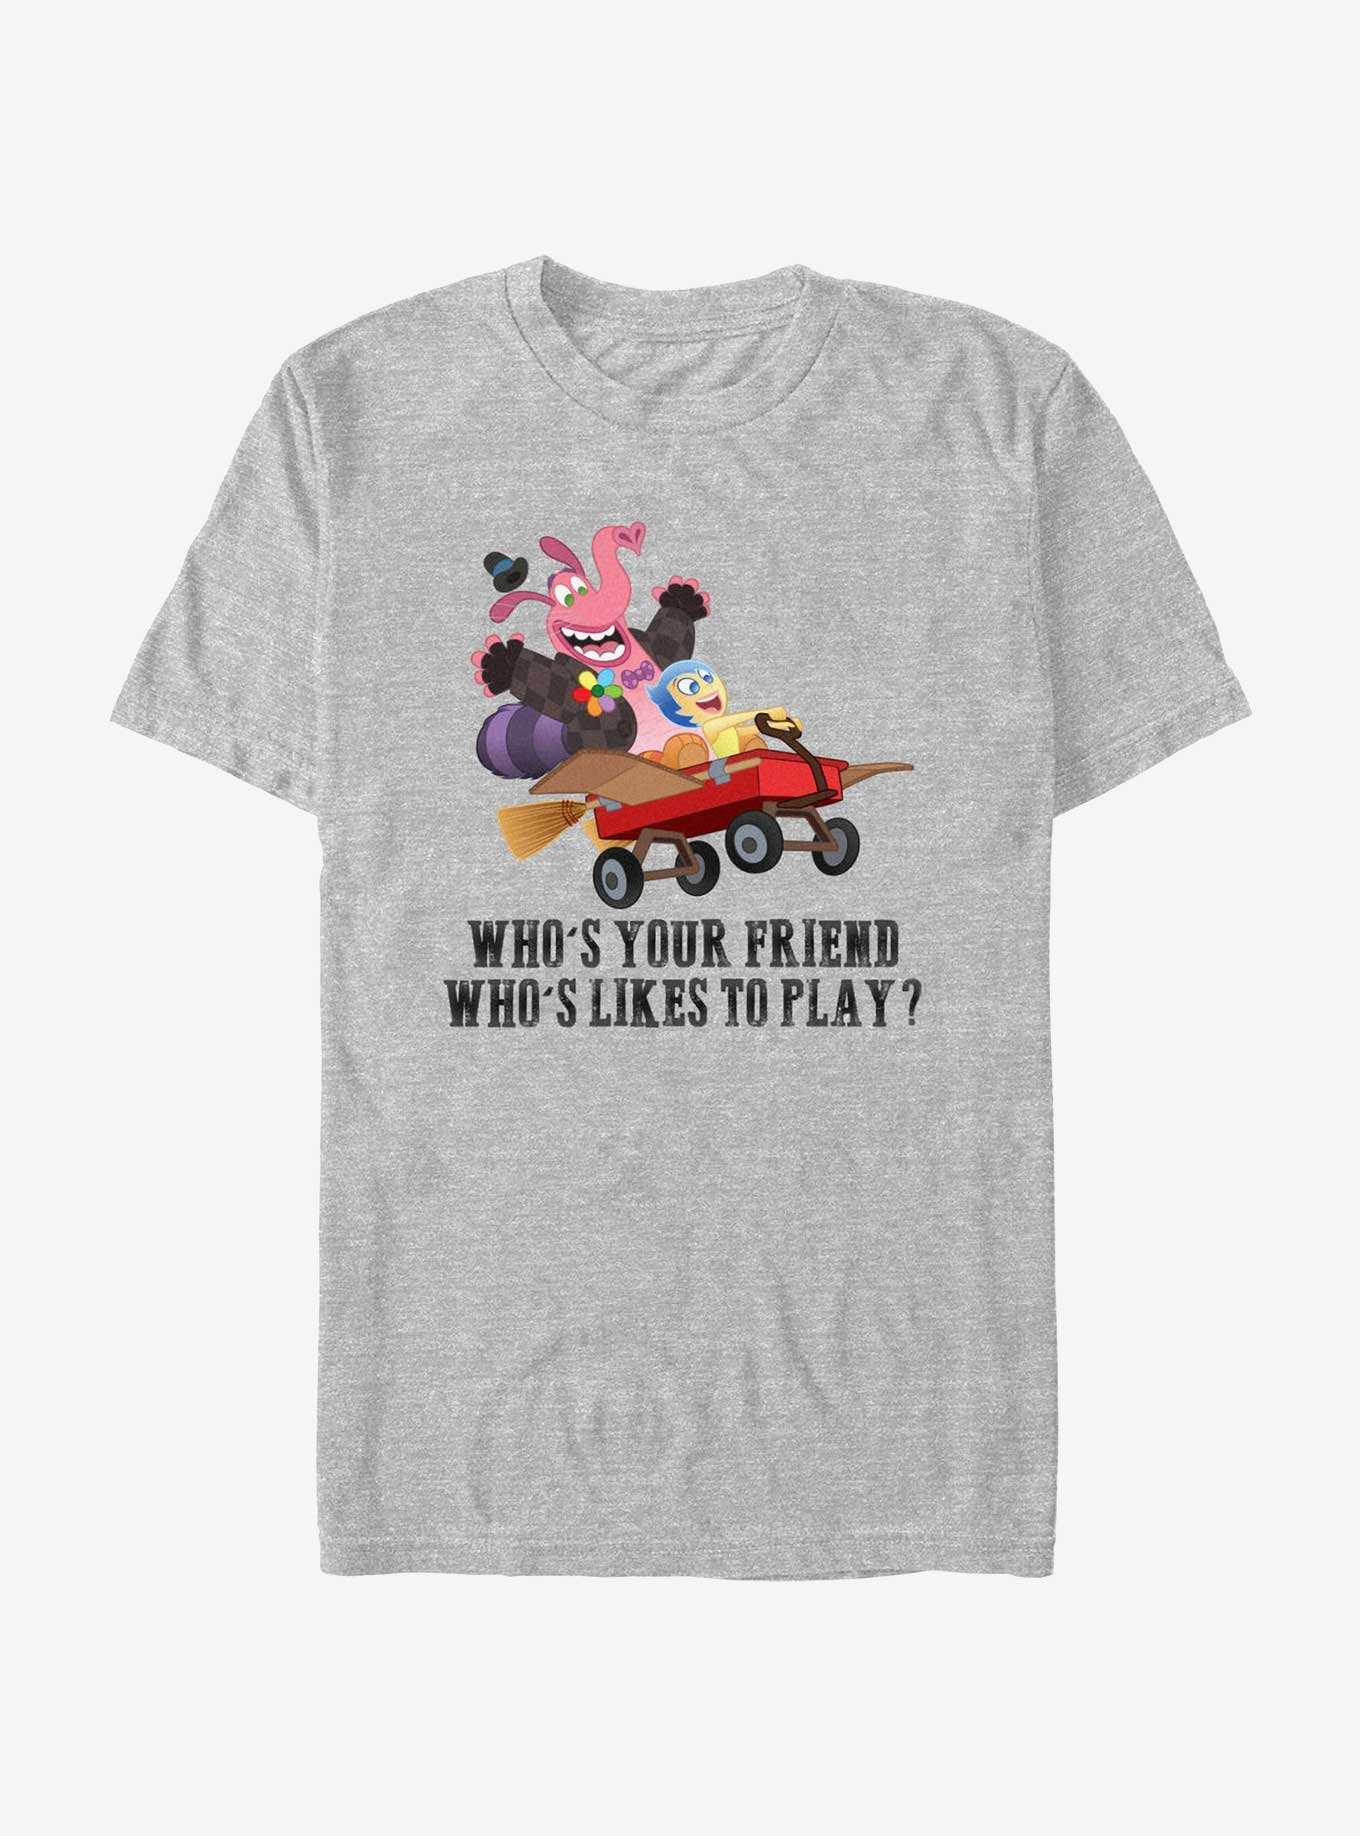 Disney Pixar Inside Out 2 The Bing Bong Song Who's Your Friend T-Shirt, , hi-res